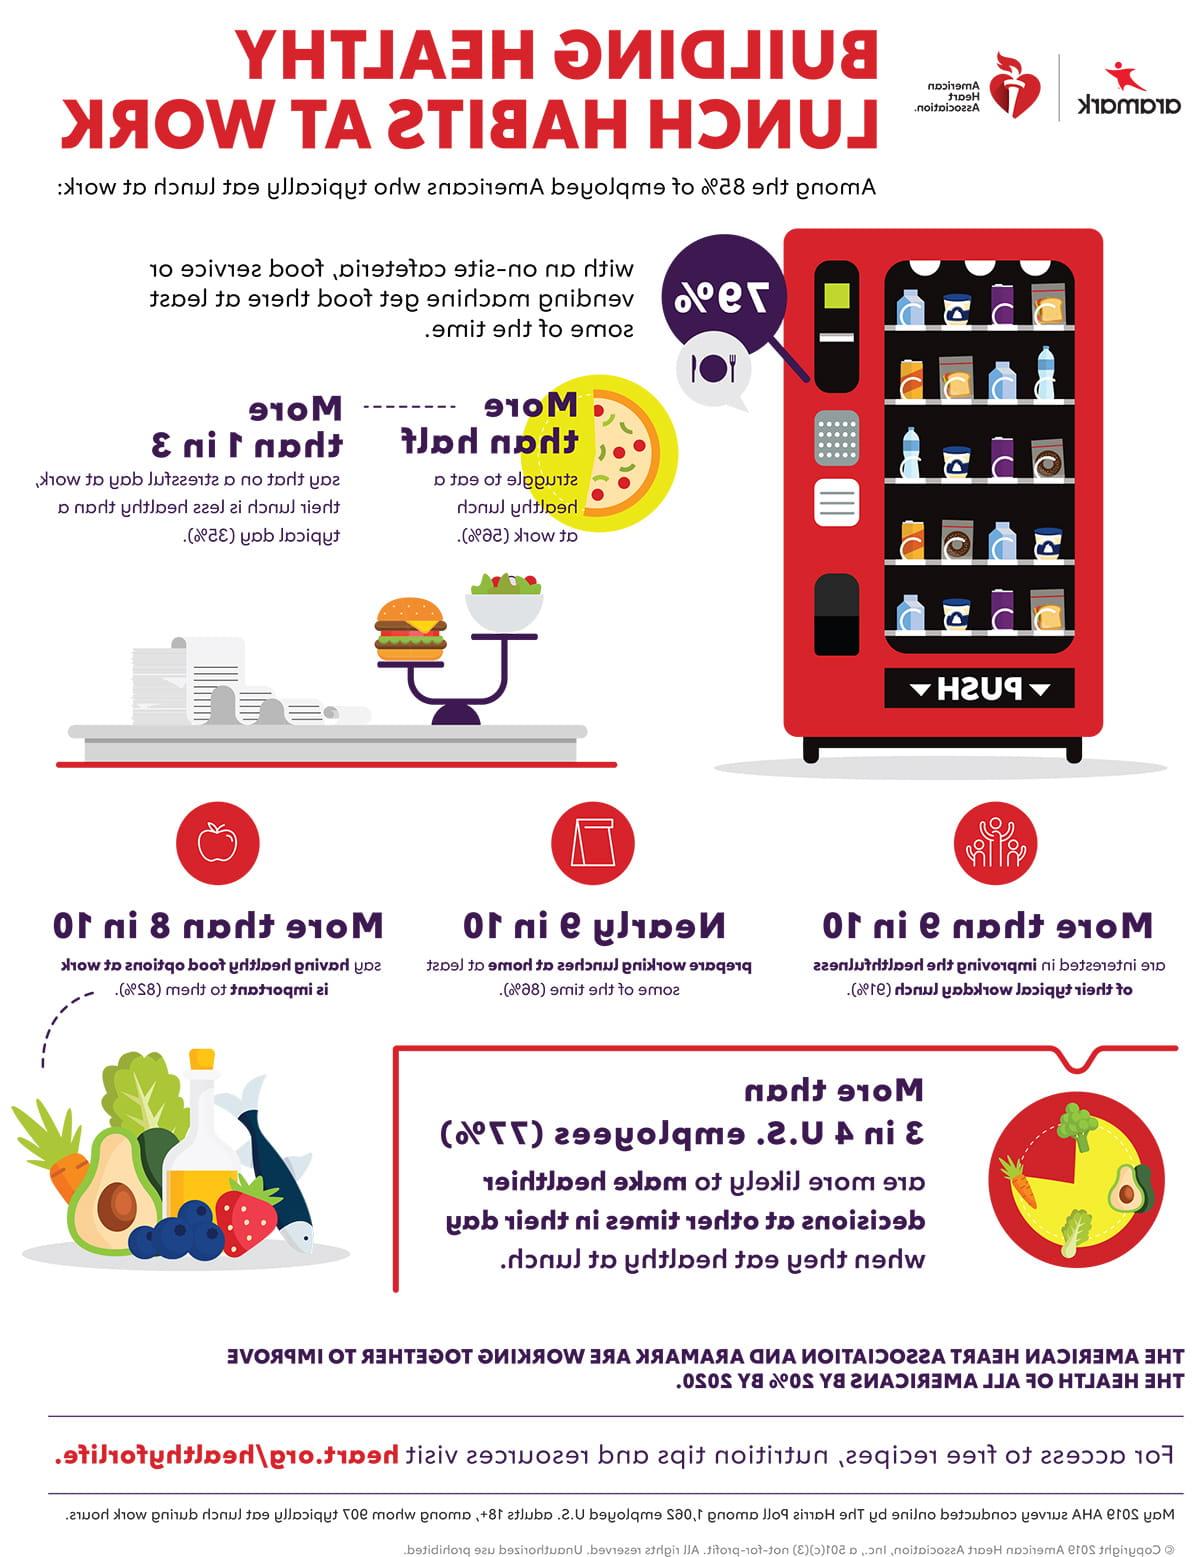 Building Healthy Lunch Habits at Work Infographic